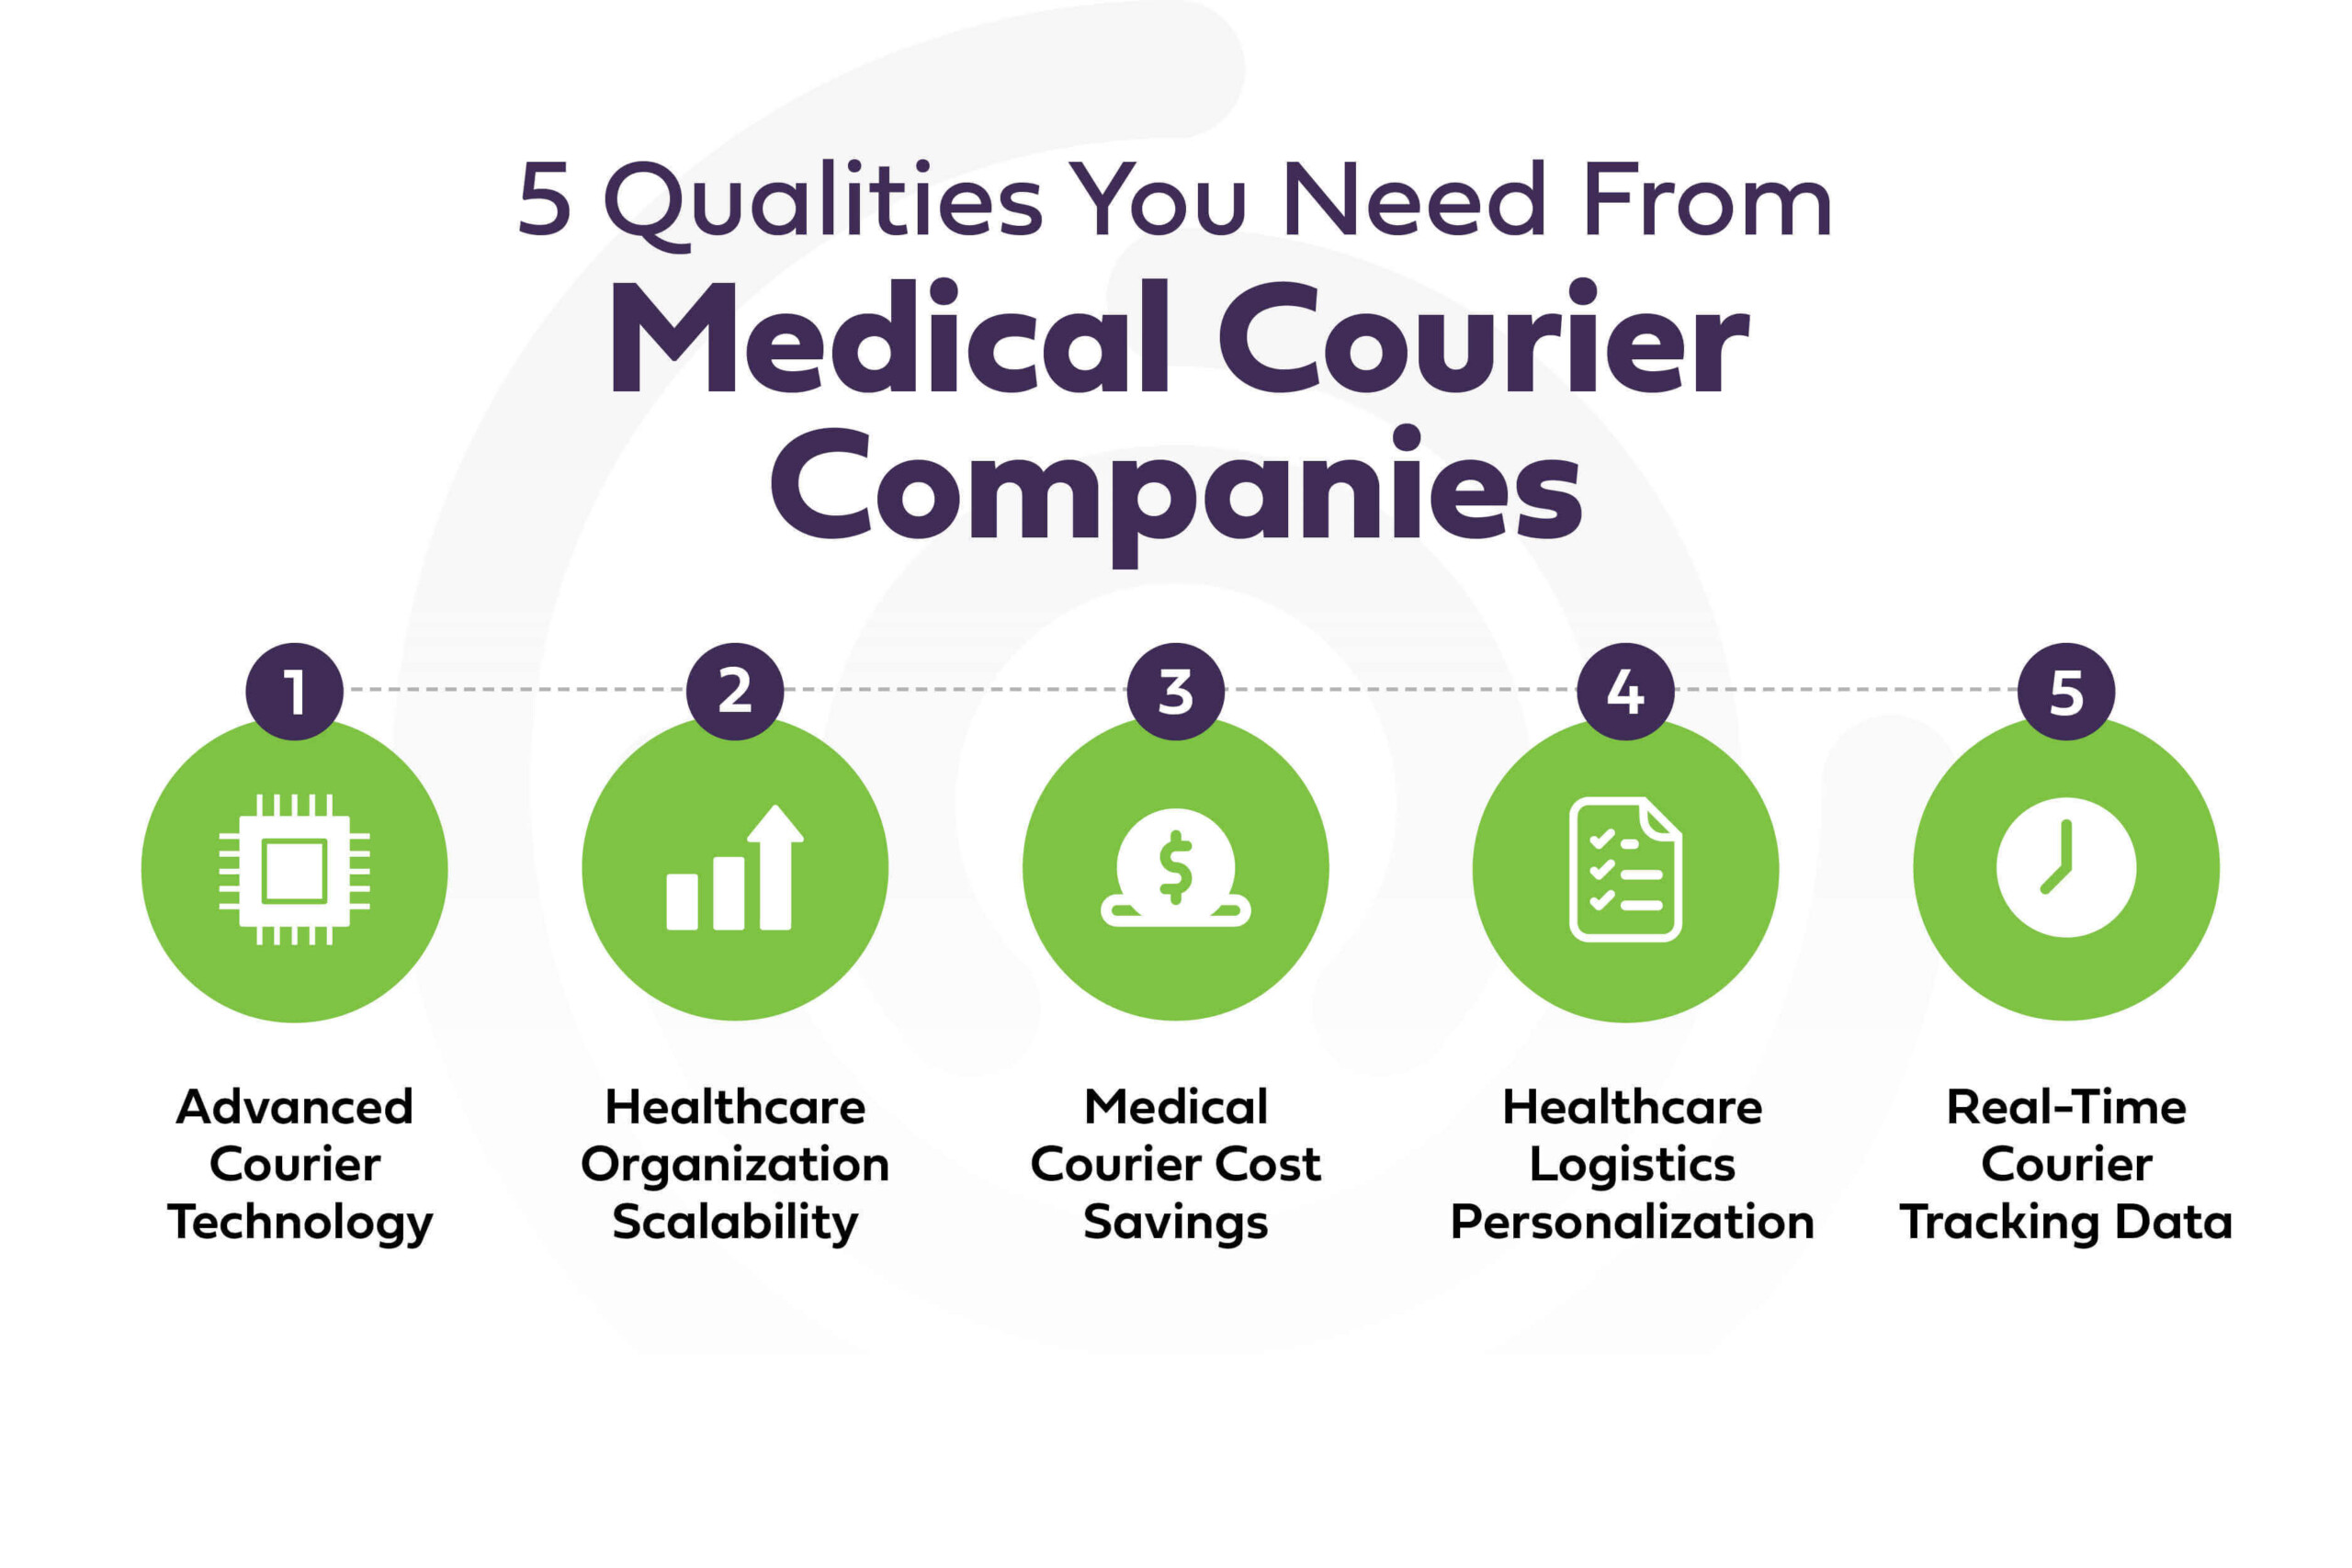 The 5 qualities you need from a medical courier company.